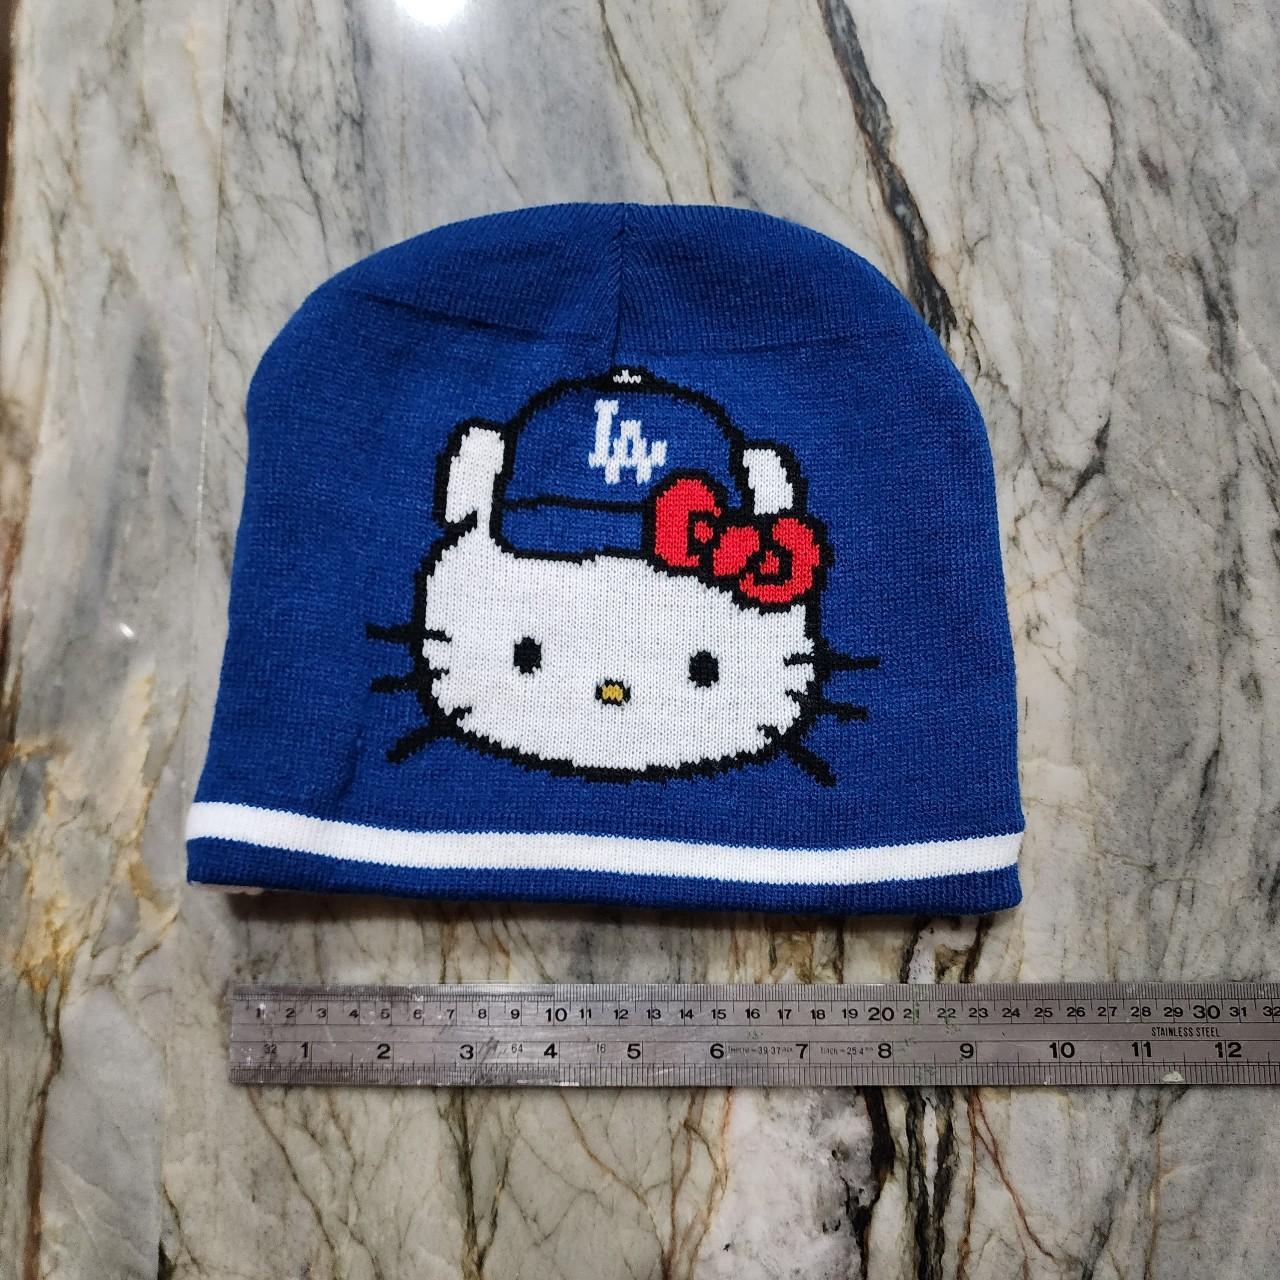 Los Angeles Dodgers, Hello Kitty Dodger tee, Dodgers Shirt